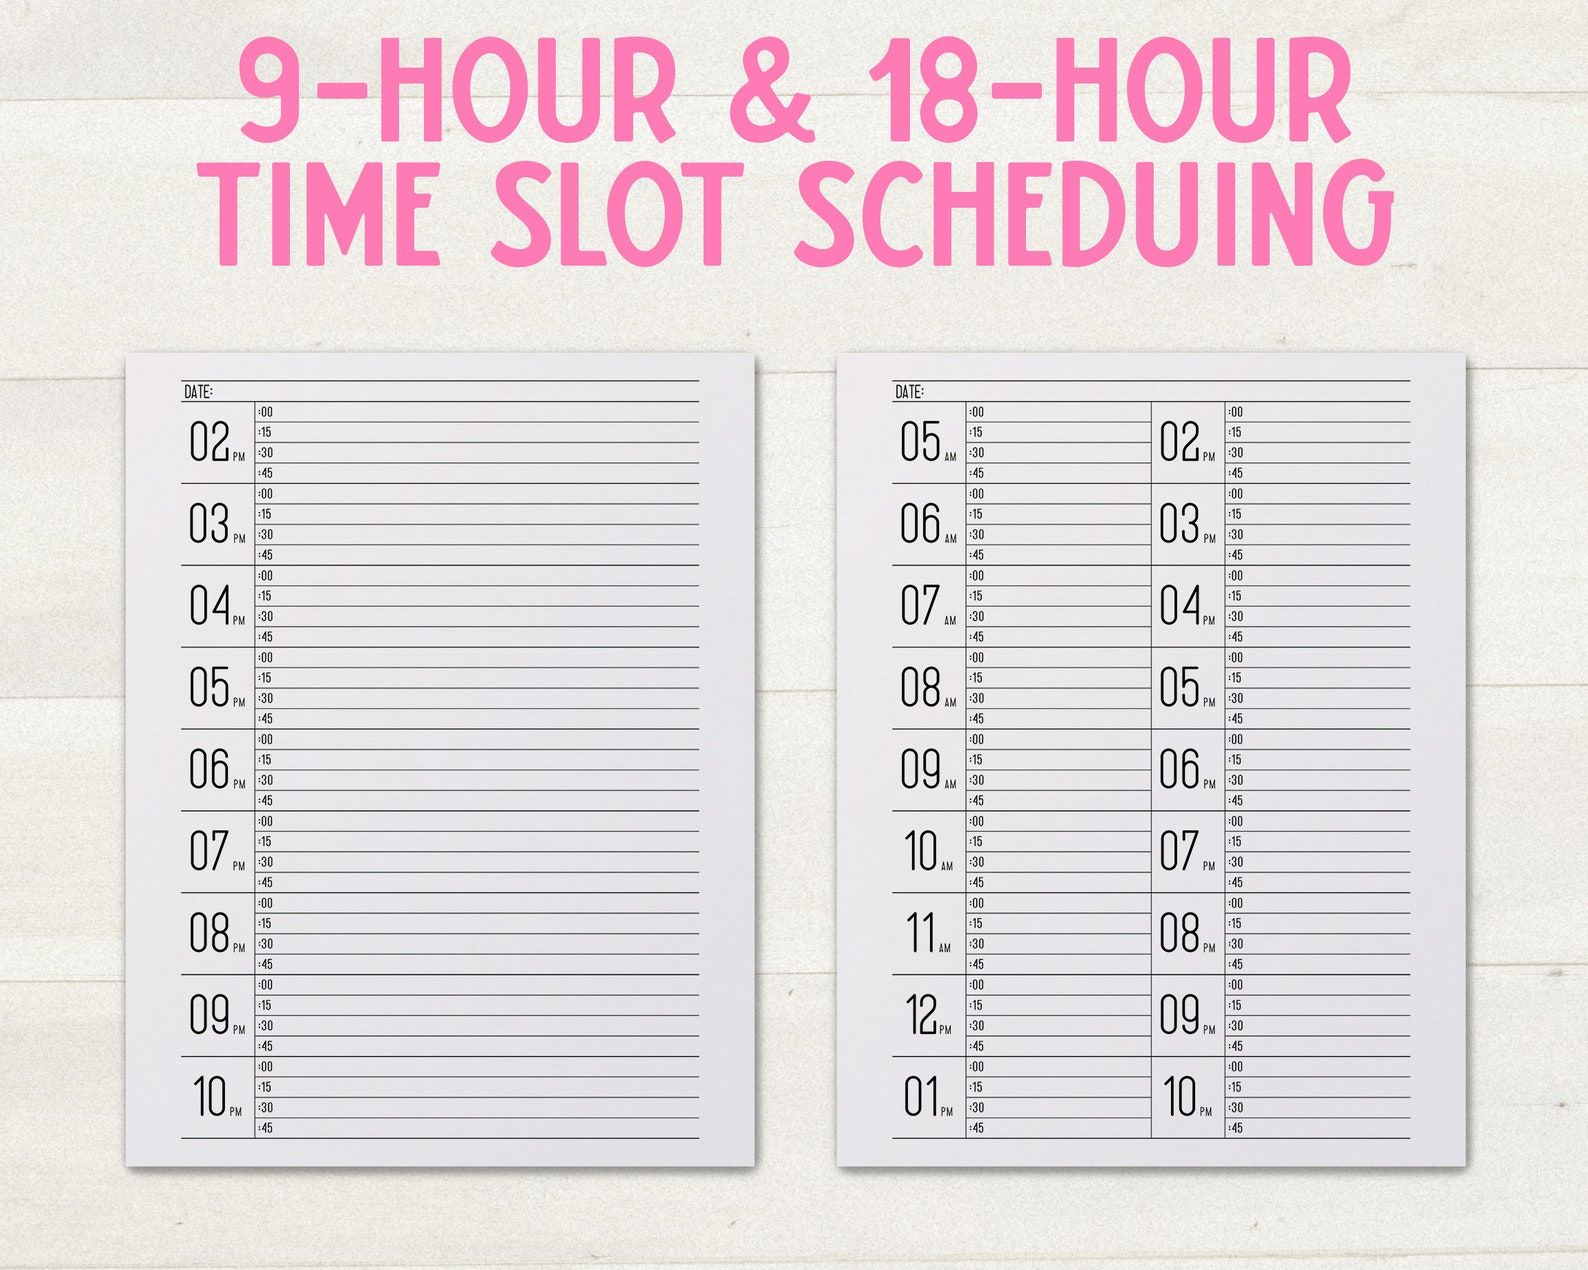 15 Minute Increment Schedule Sheet Large Size Number